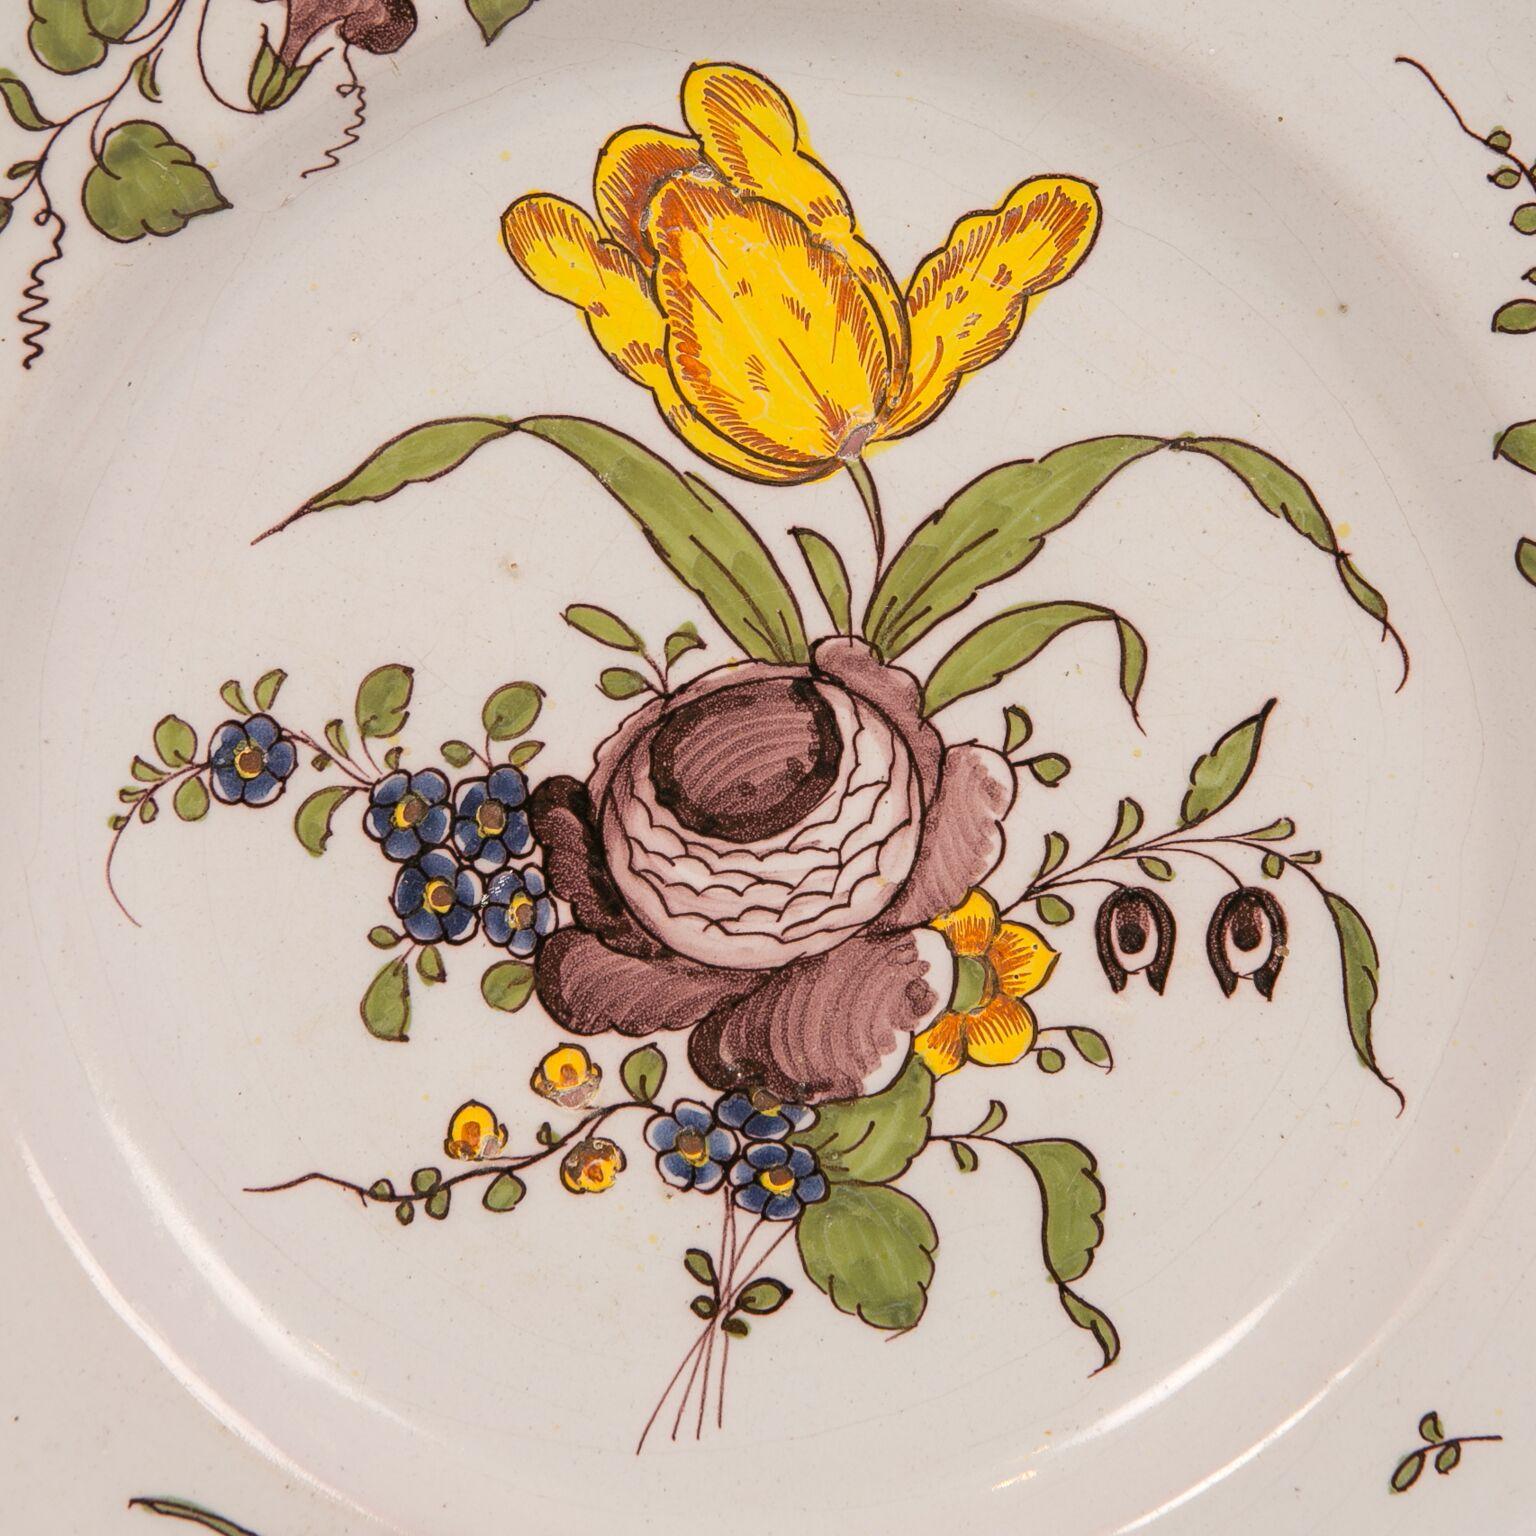 We are pleased to offer this antique Dutch delft charger made in the 18th century, circa 1770. It features a beautiful bouquet of flowers. We see a bright yellow tulip, a peony painted in shades of purple, and other flowers painted in purple, and